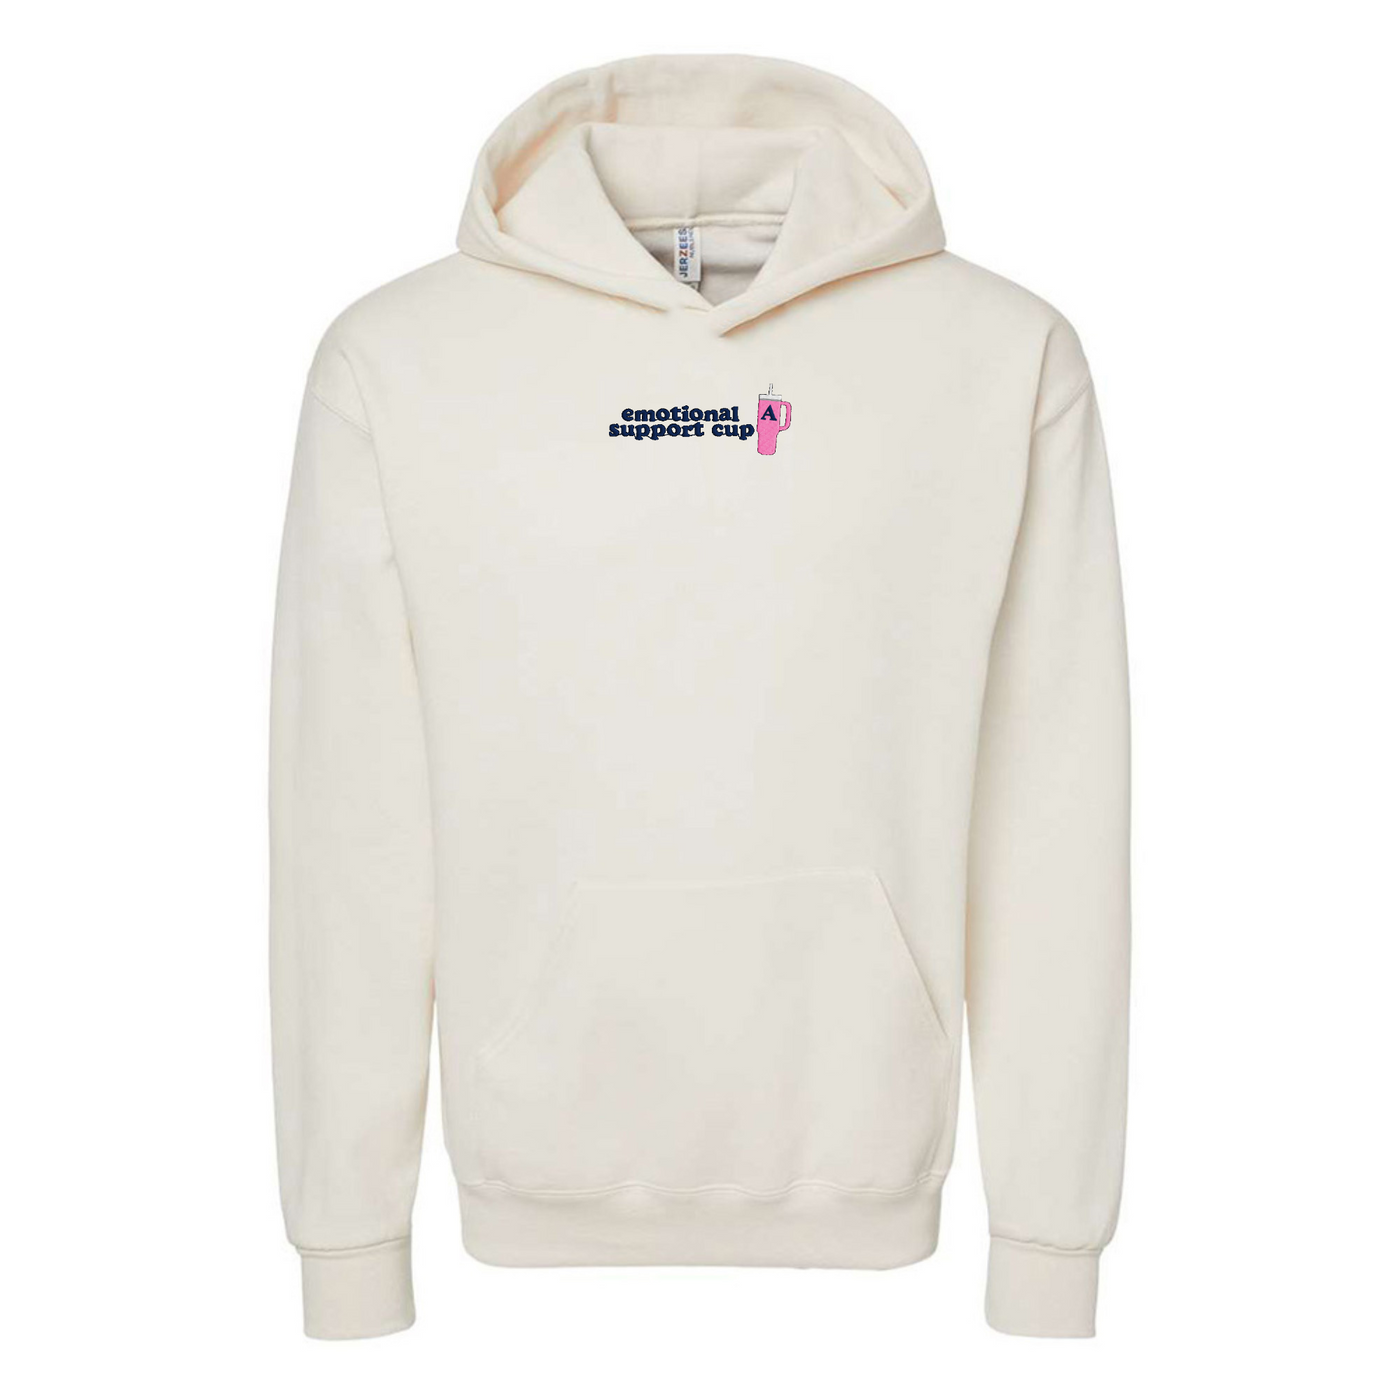 Initial 'Emotional Support Cup' Hoodie